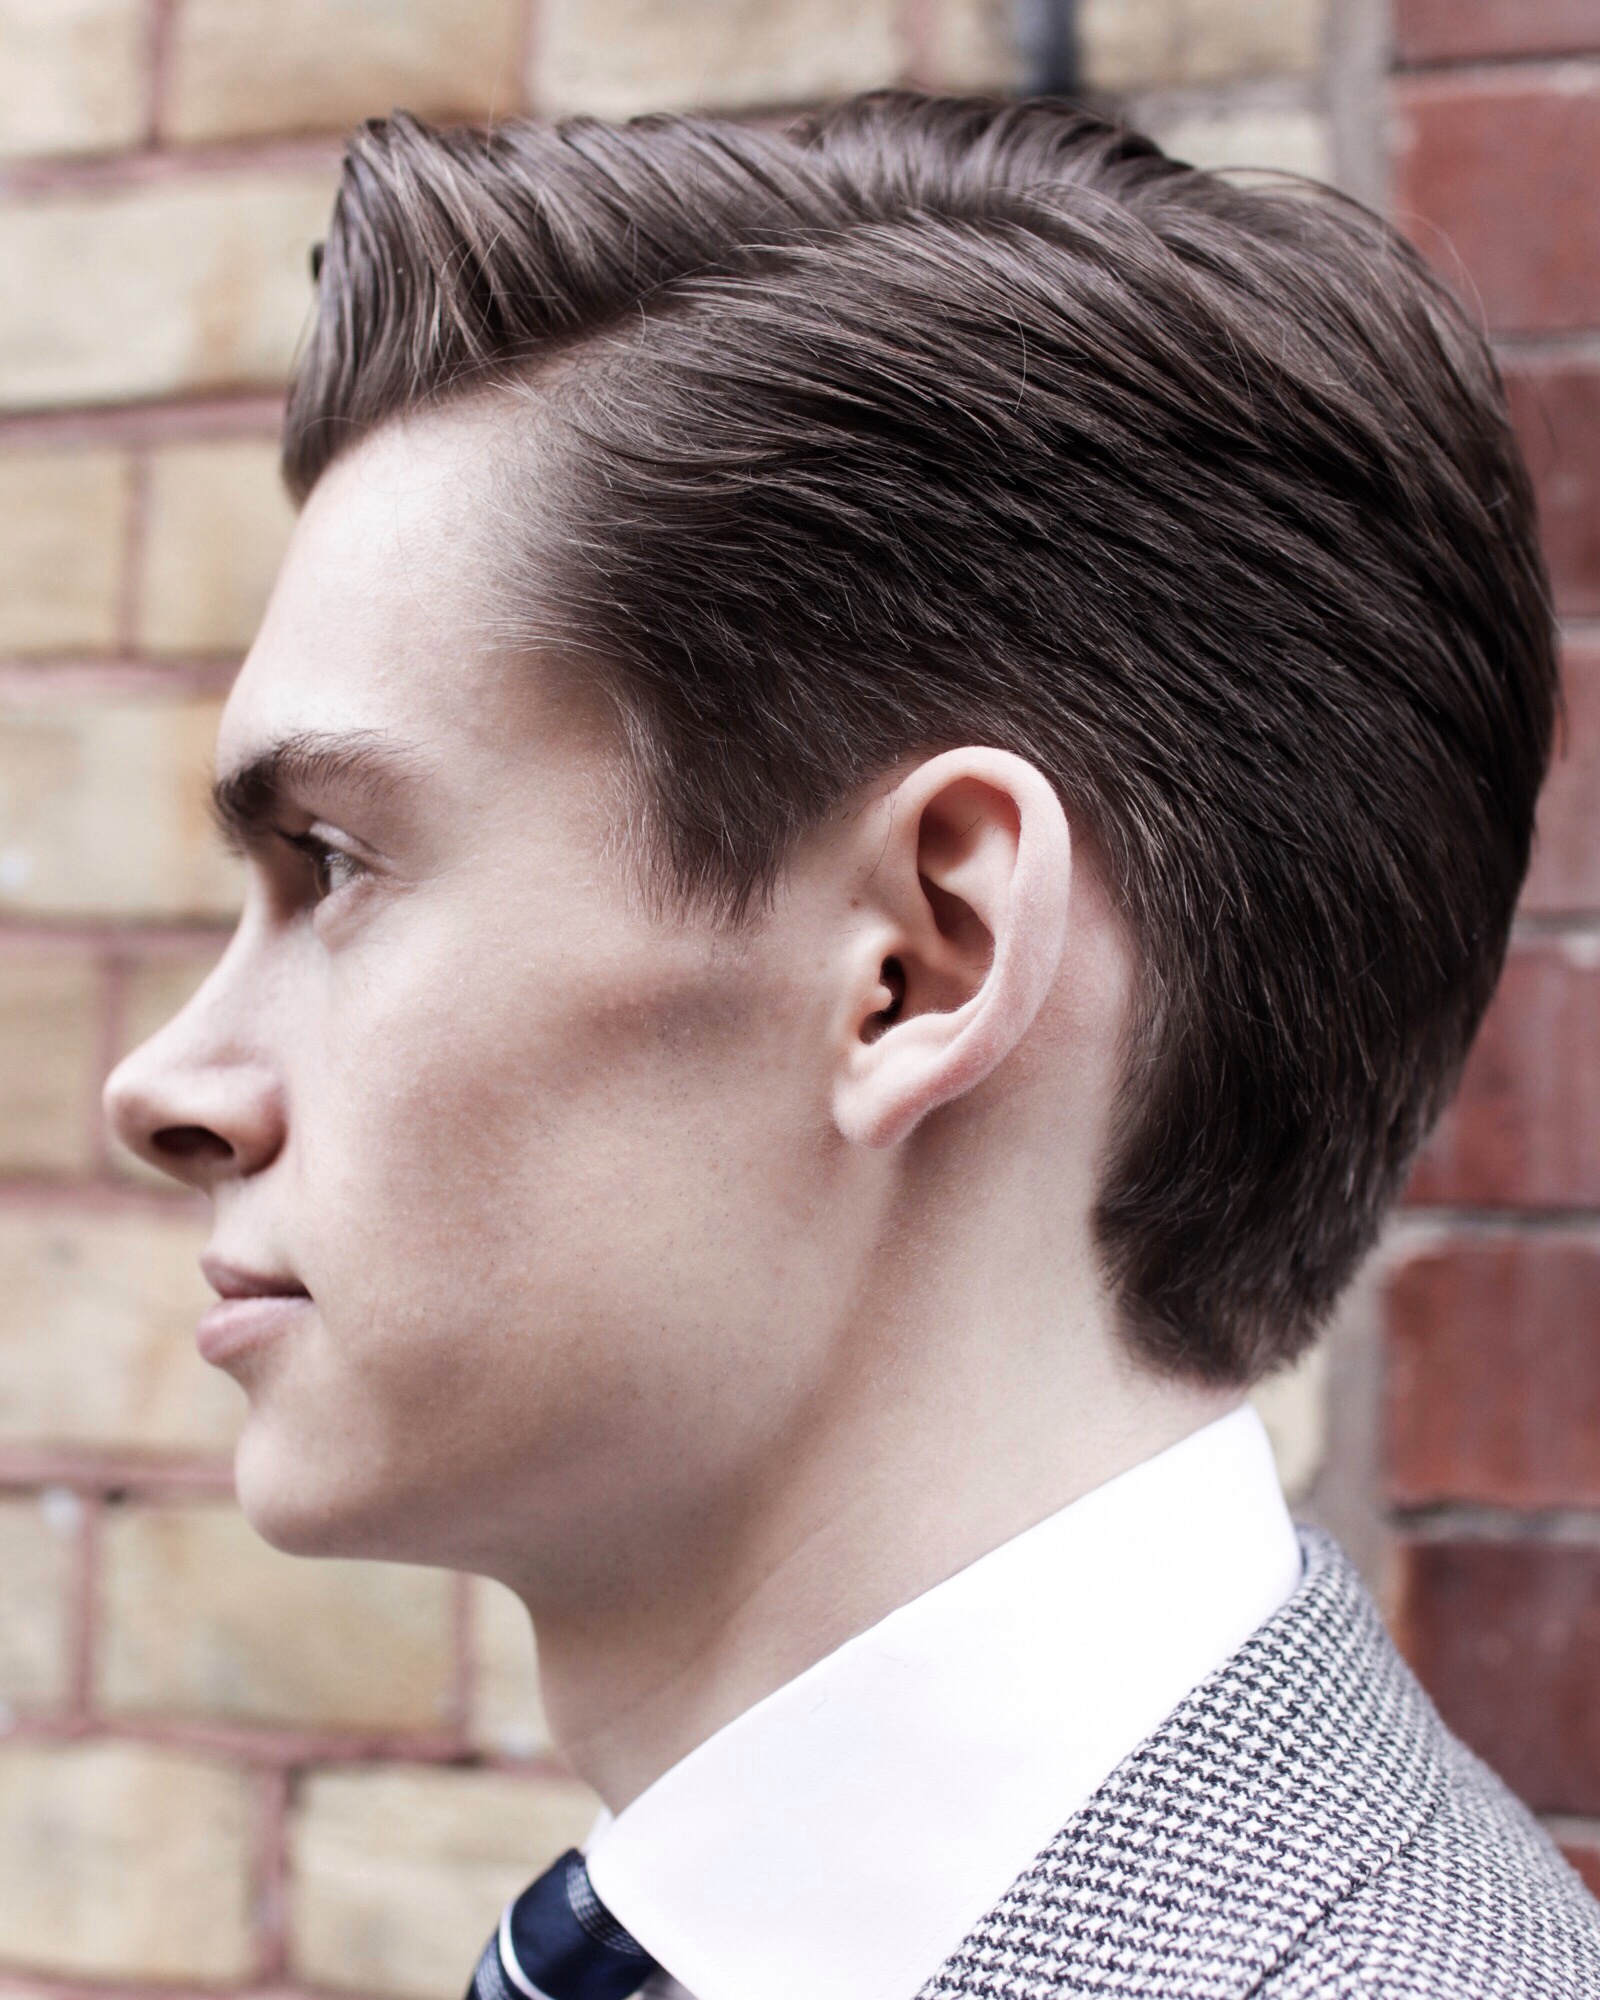 A Classic Gentleman’s Haircut: The Side Parting